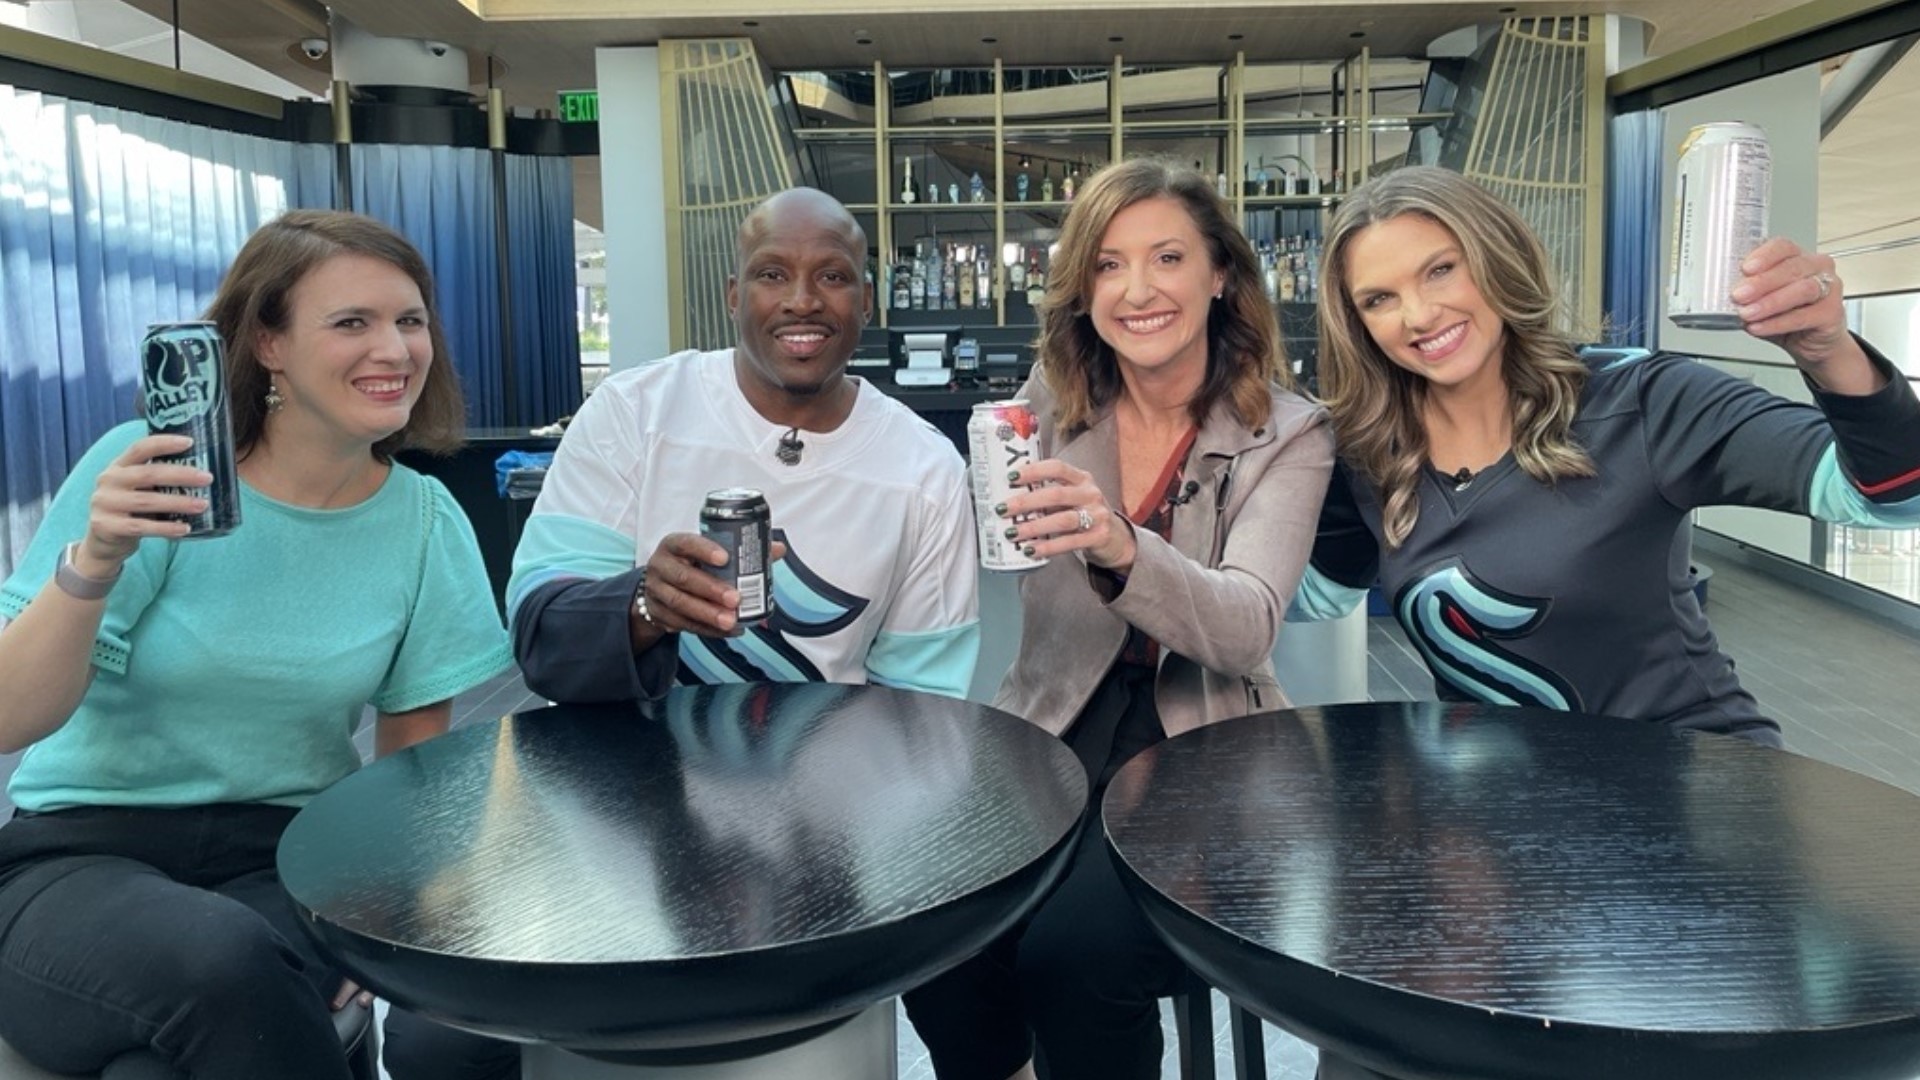 Producer Rebecca Perry, New Day contributor Terry Hollimon, and Kraken analyst Alison Lukan joined Amity in CPA's Space Needle Lounge for some Hot Topics! #newdaynw